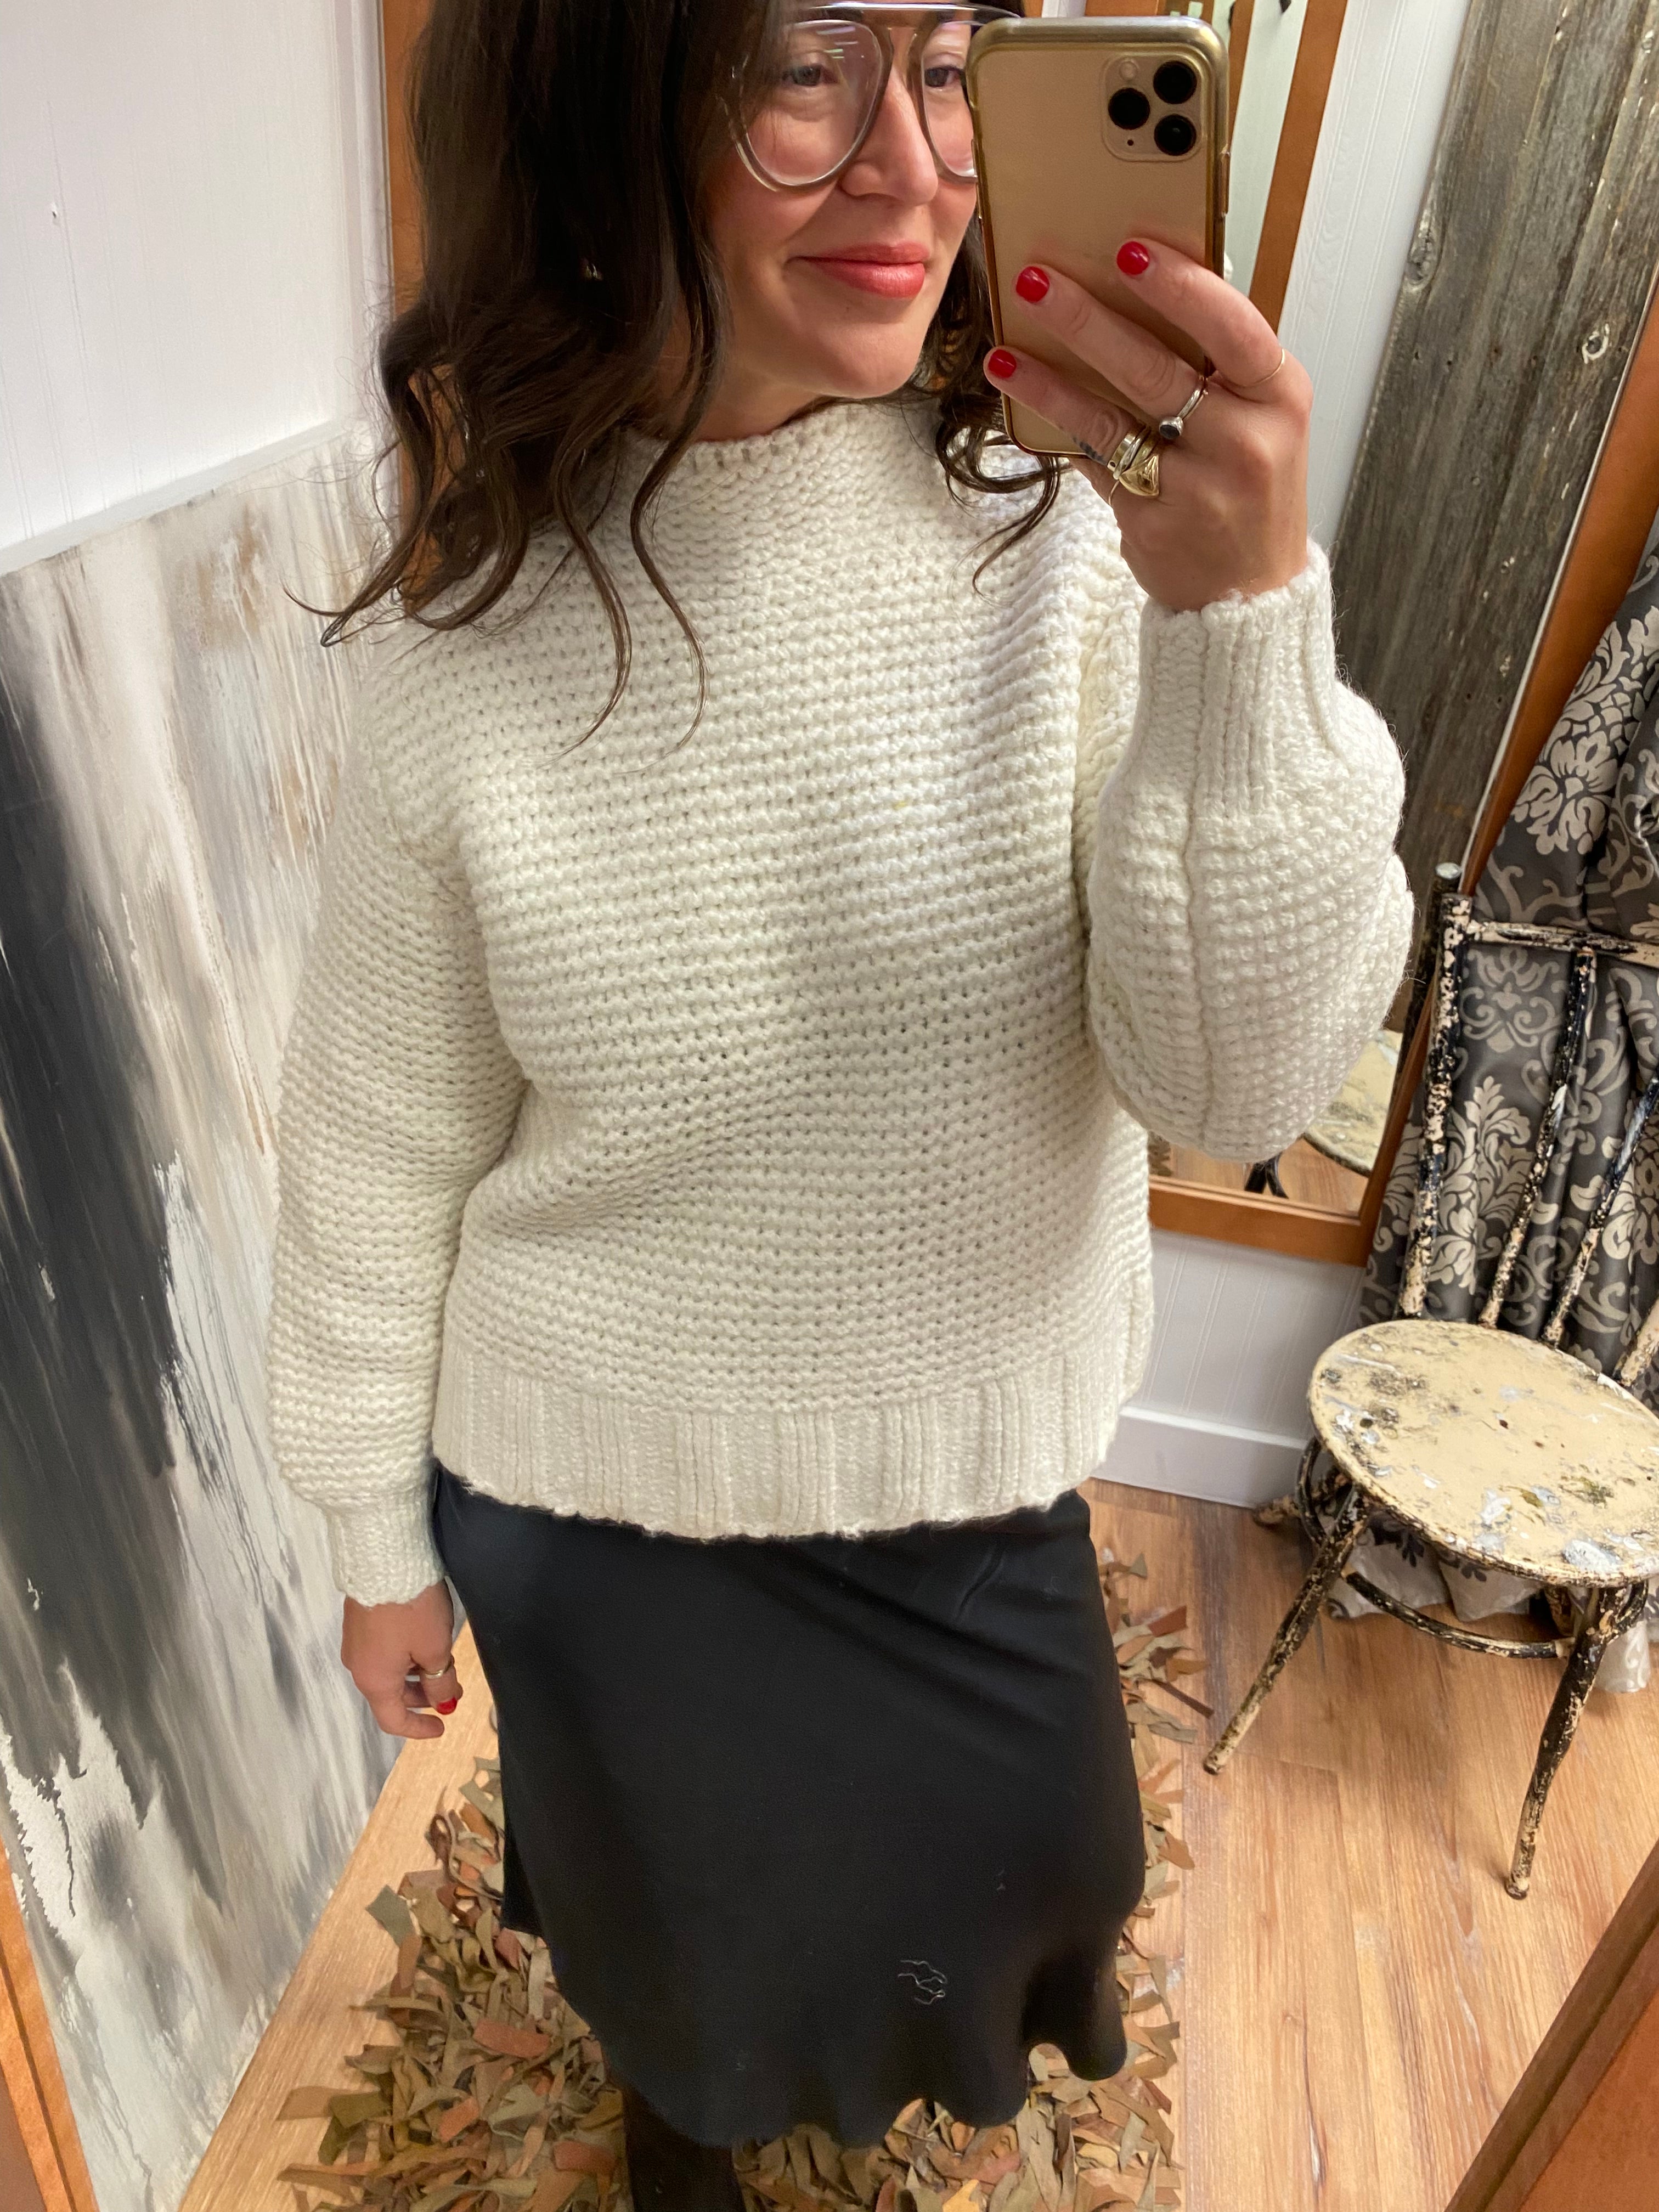 LINE Annabelle Pullover in White Lotus